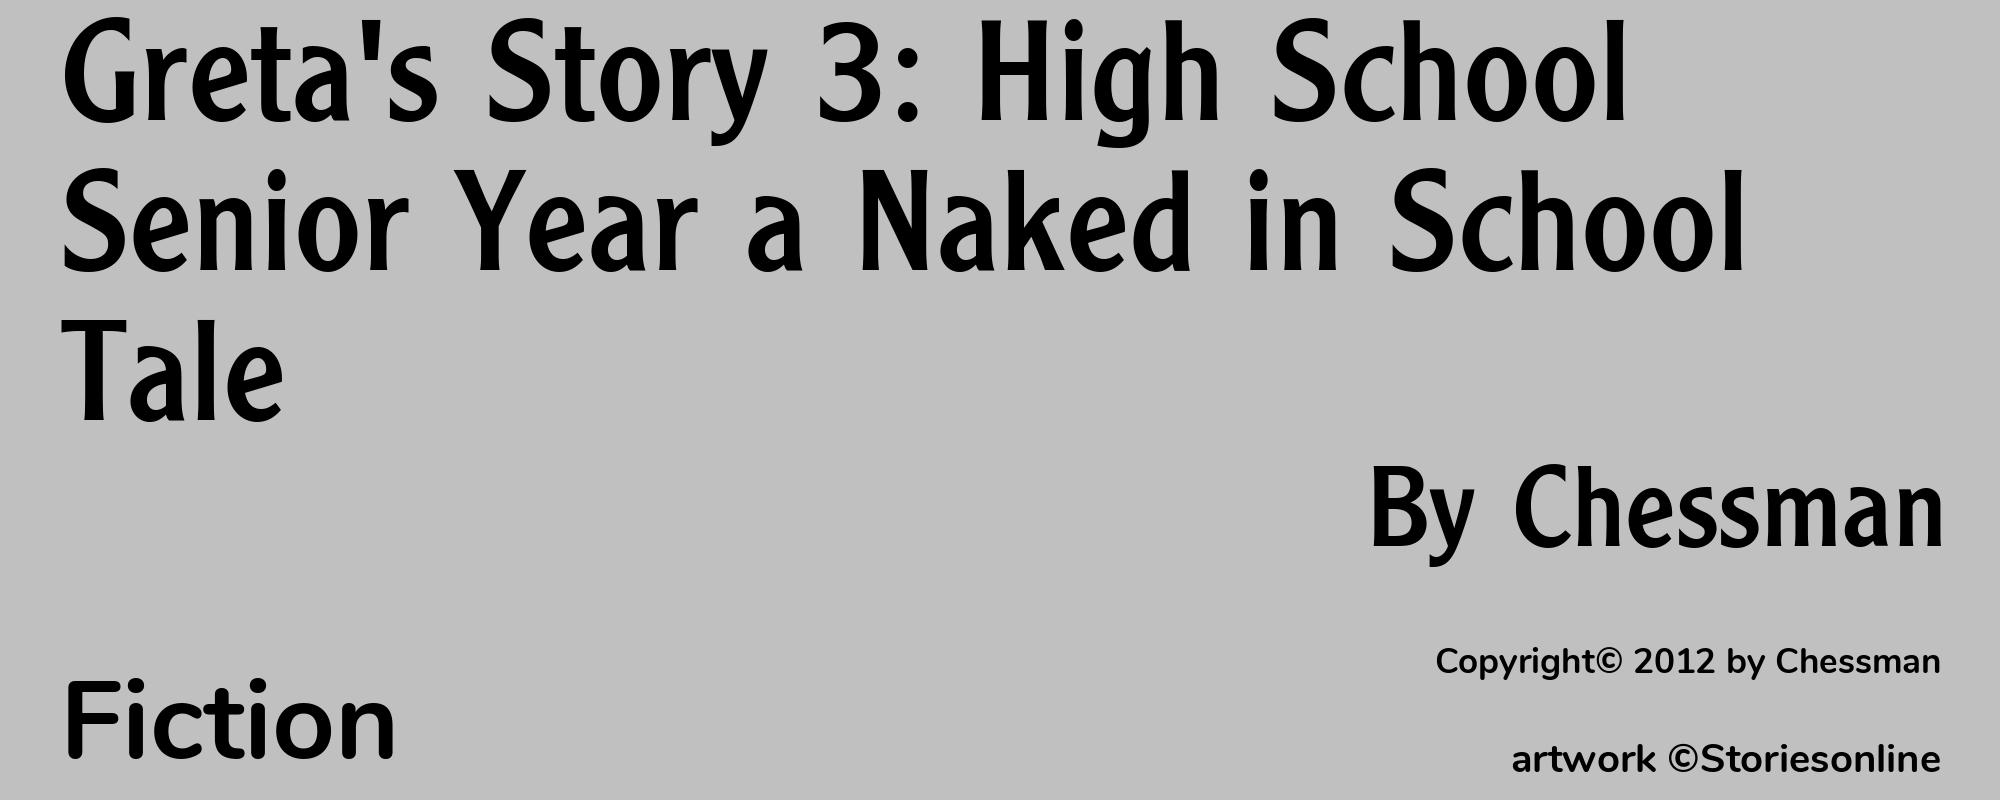 Greta's Story 3: High School Senior Year a Naked in School Tale - Cover